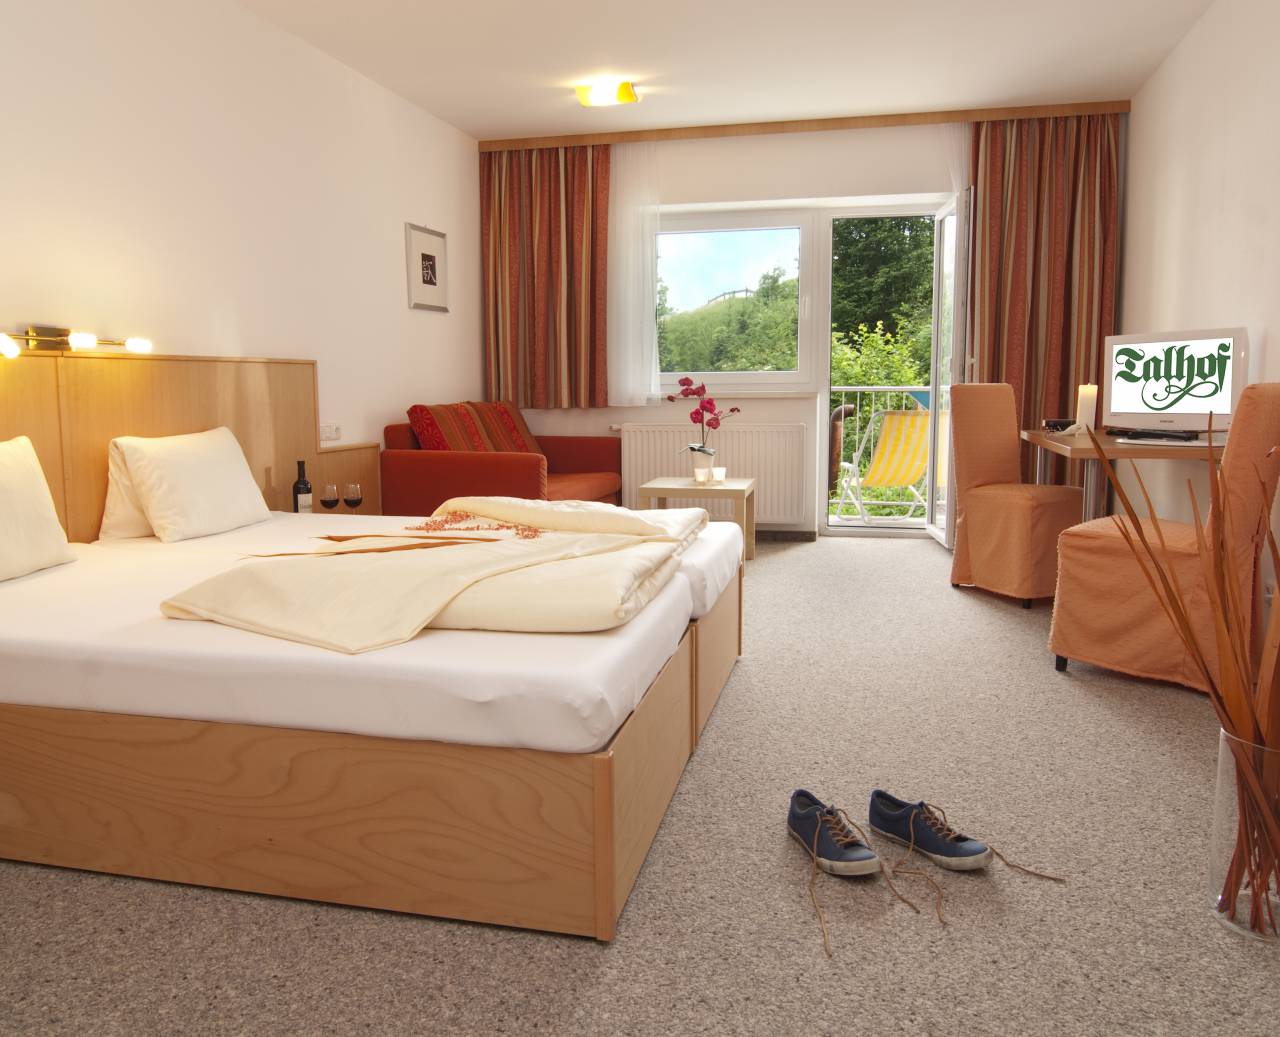 Hotel room with double bed, sitting set and balcony with nature view